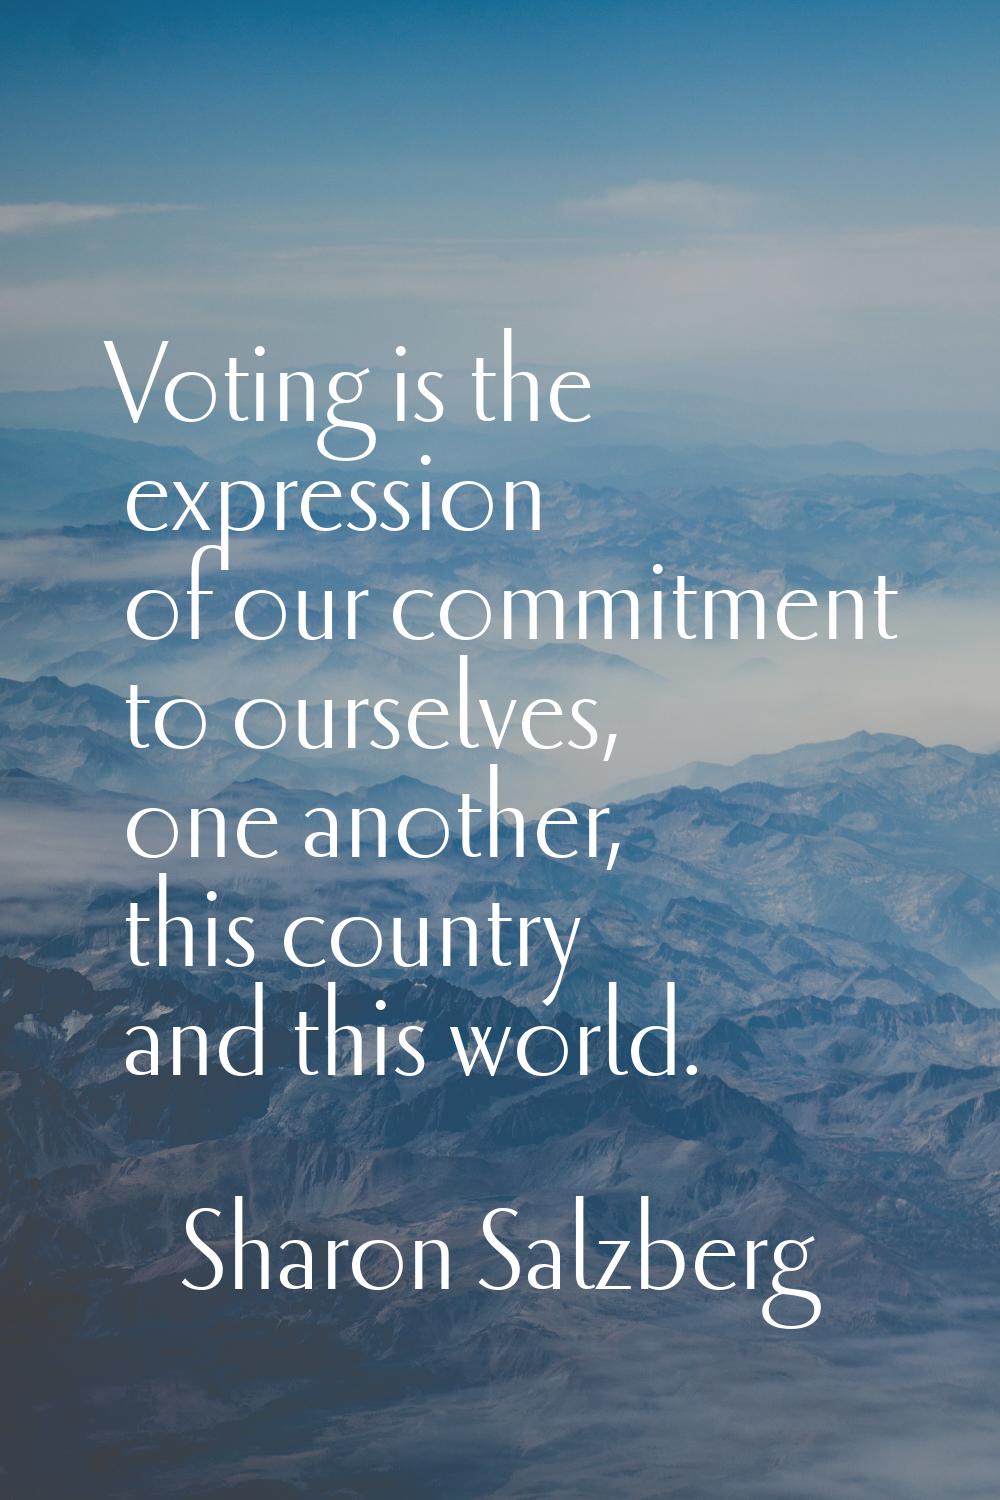 Voting is the expression of our commitment to ourselves, one another, this country and this world.